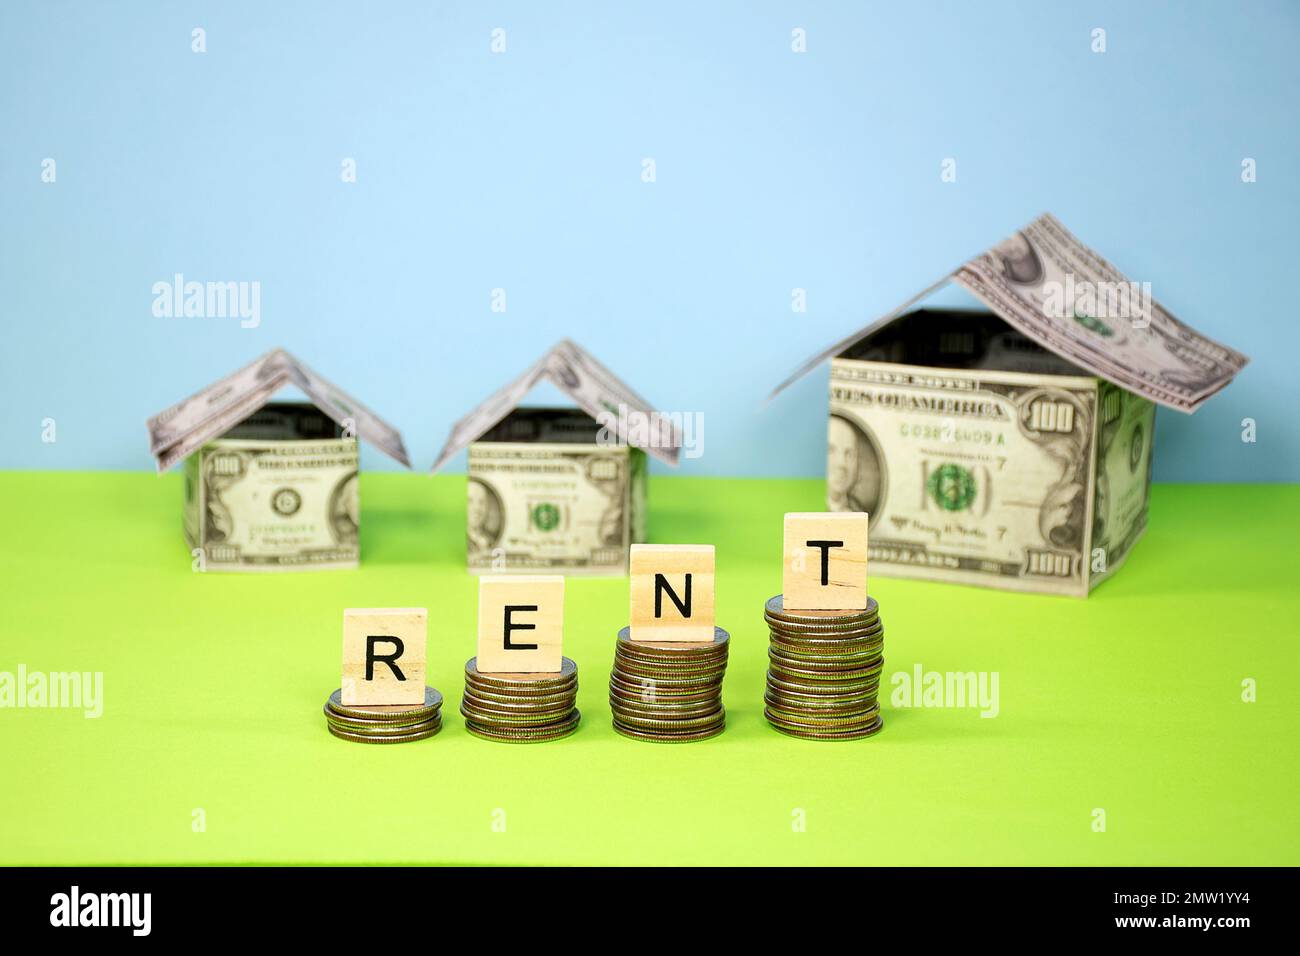 Rent sign in wooden word blocks on stacked quarters with money houses Stock Photo